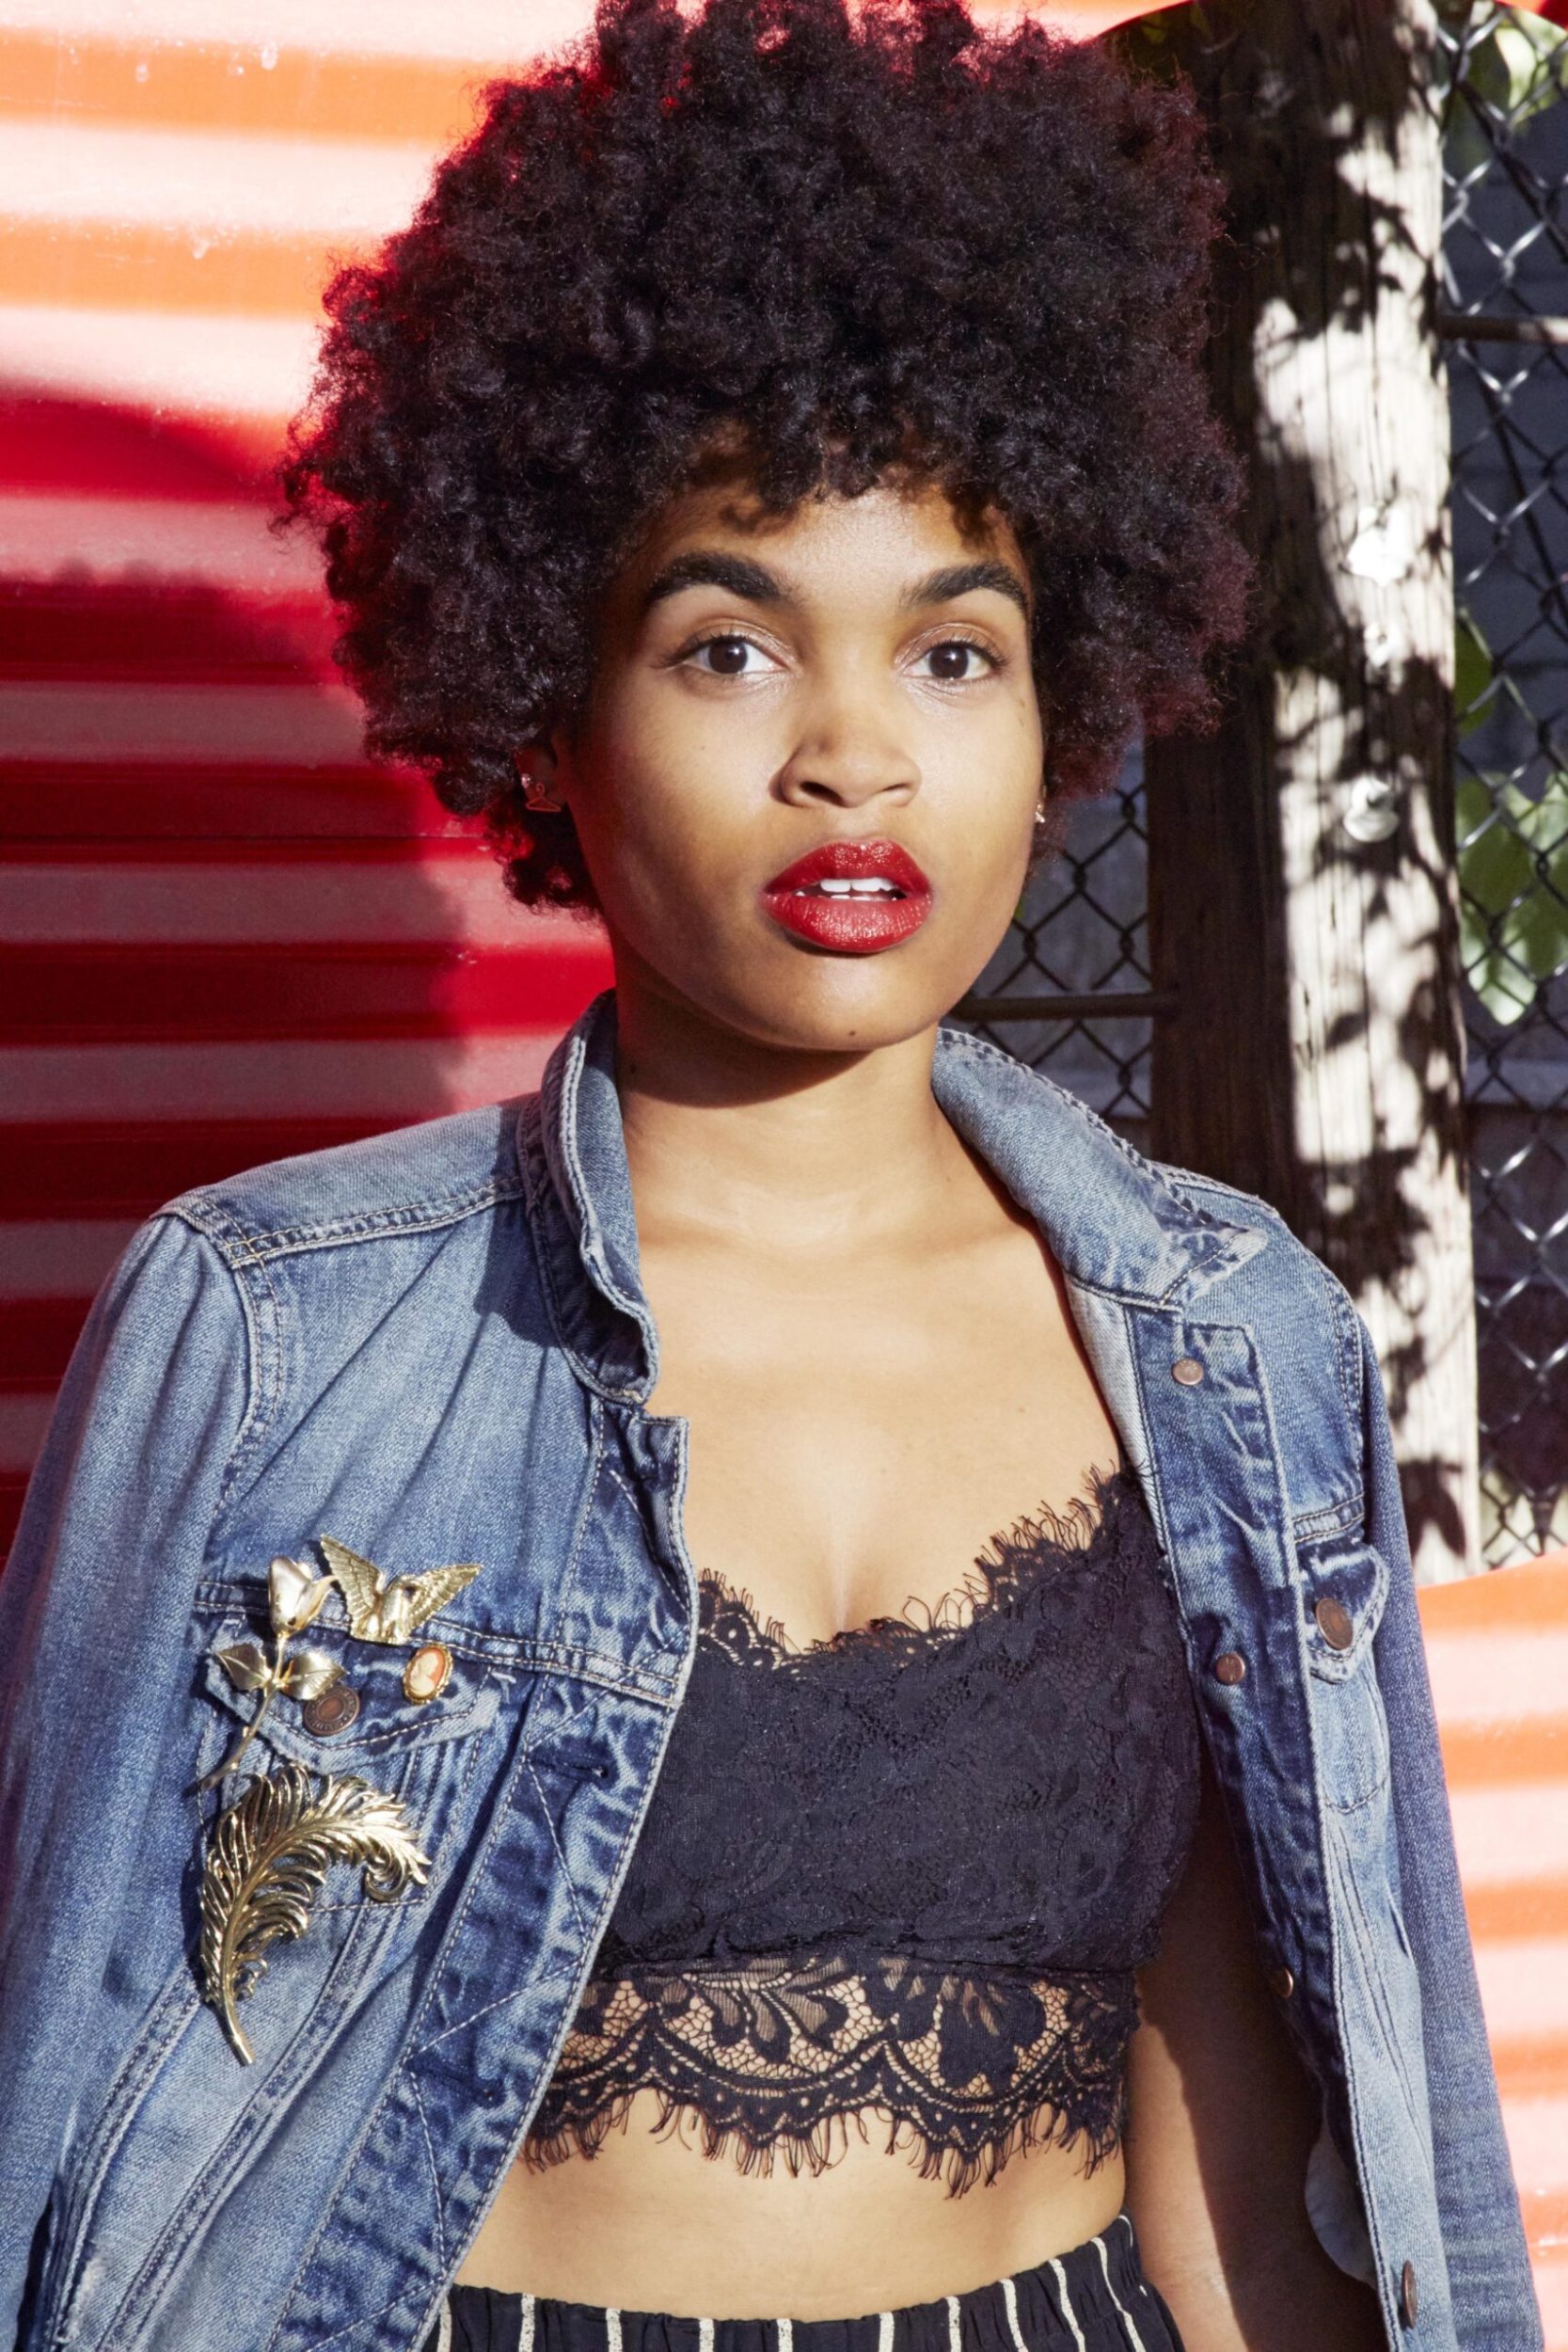 Woman wearing blue jean jacket with gold broaches covering holes